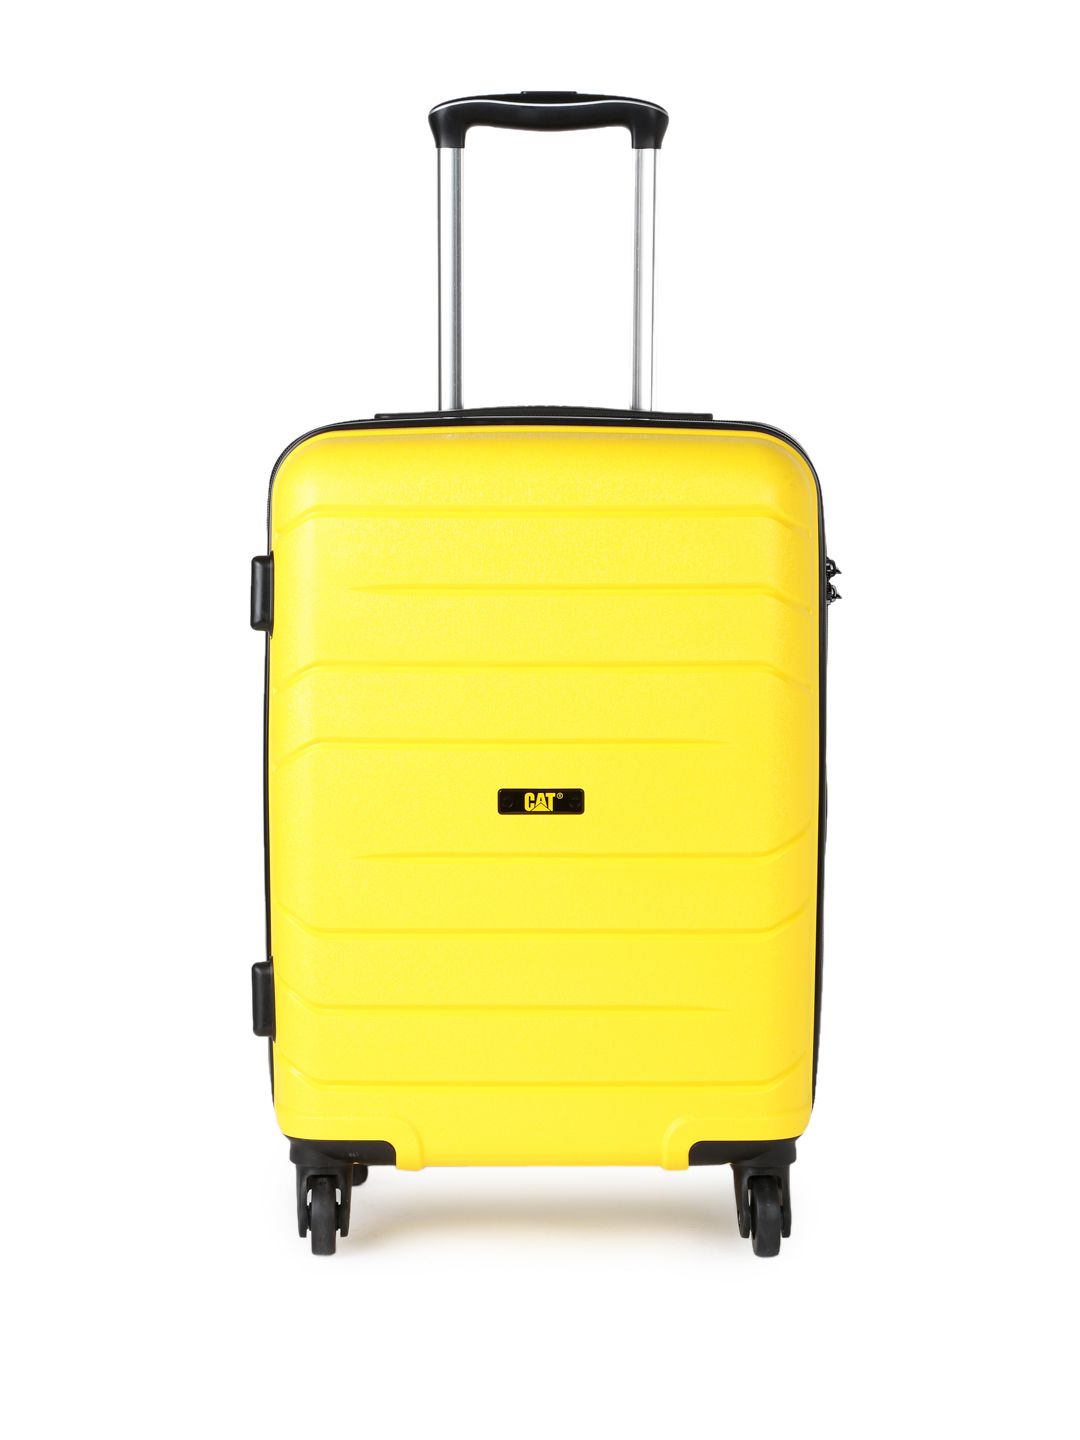 CAT Unisex Yellow Crosscheck 20" Horizontal Line Checkin Hardsided Small Trolley Suitcase Price in India